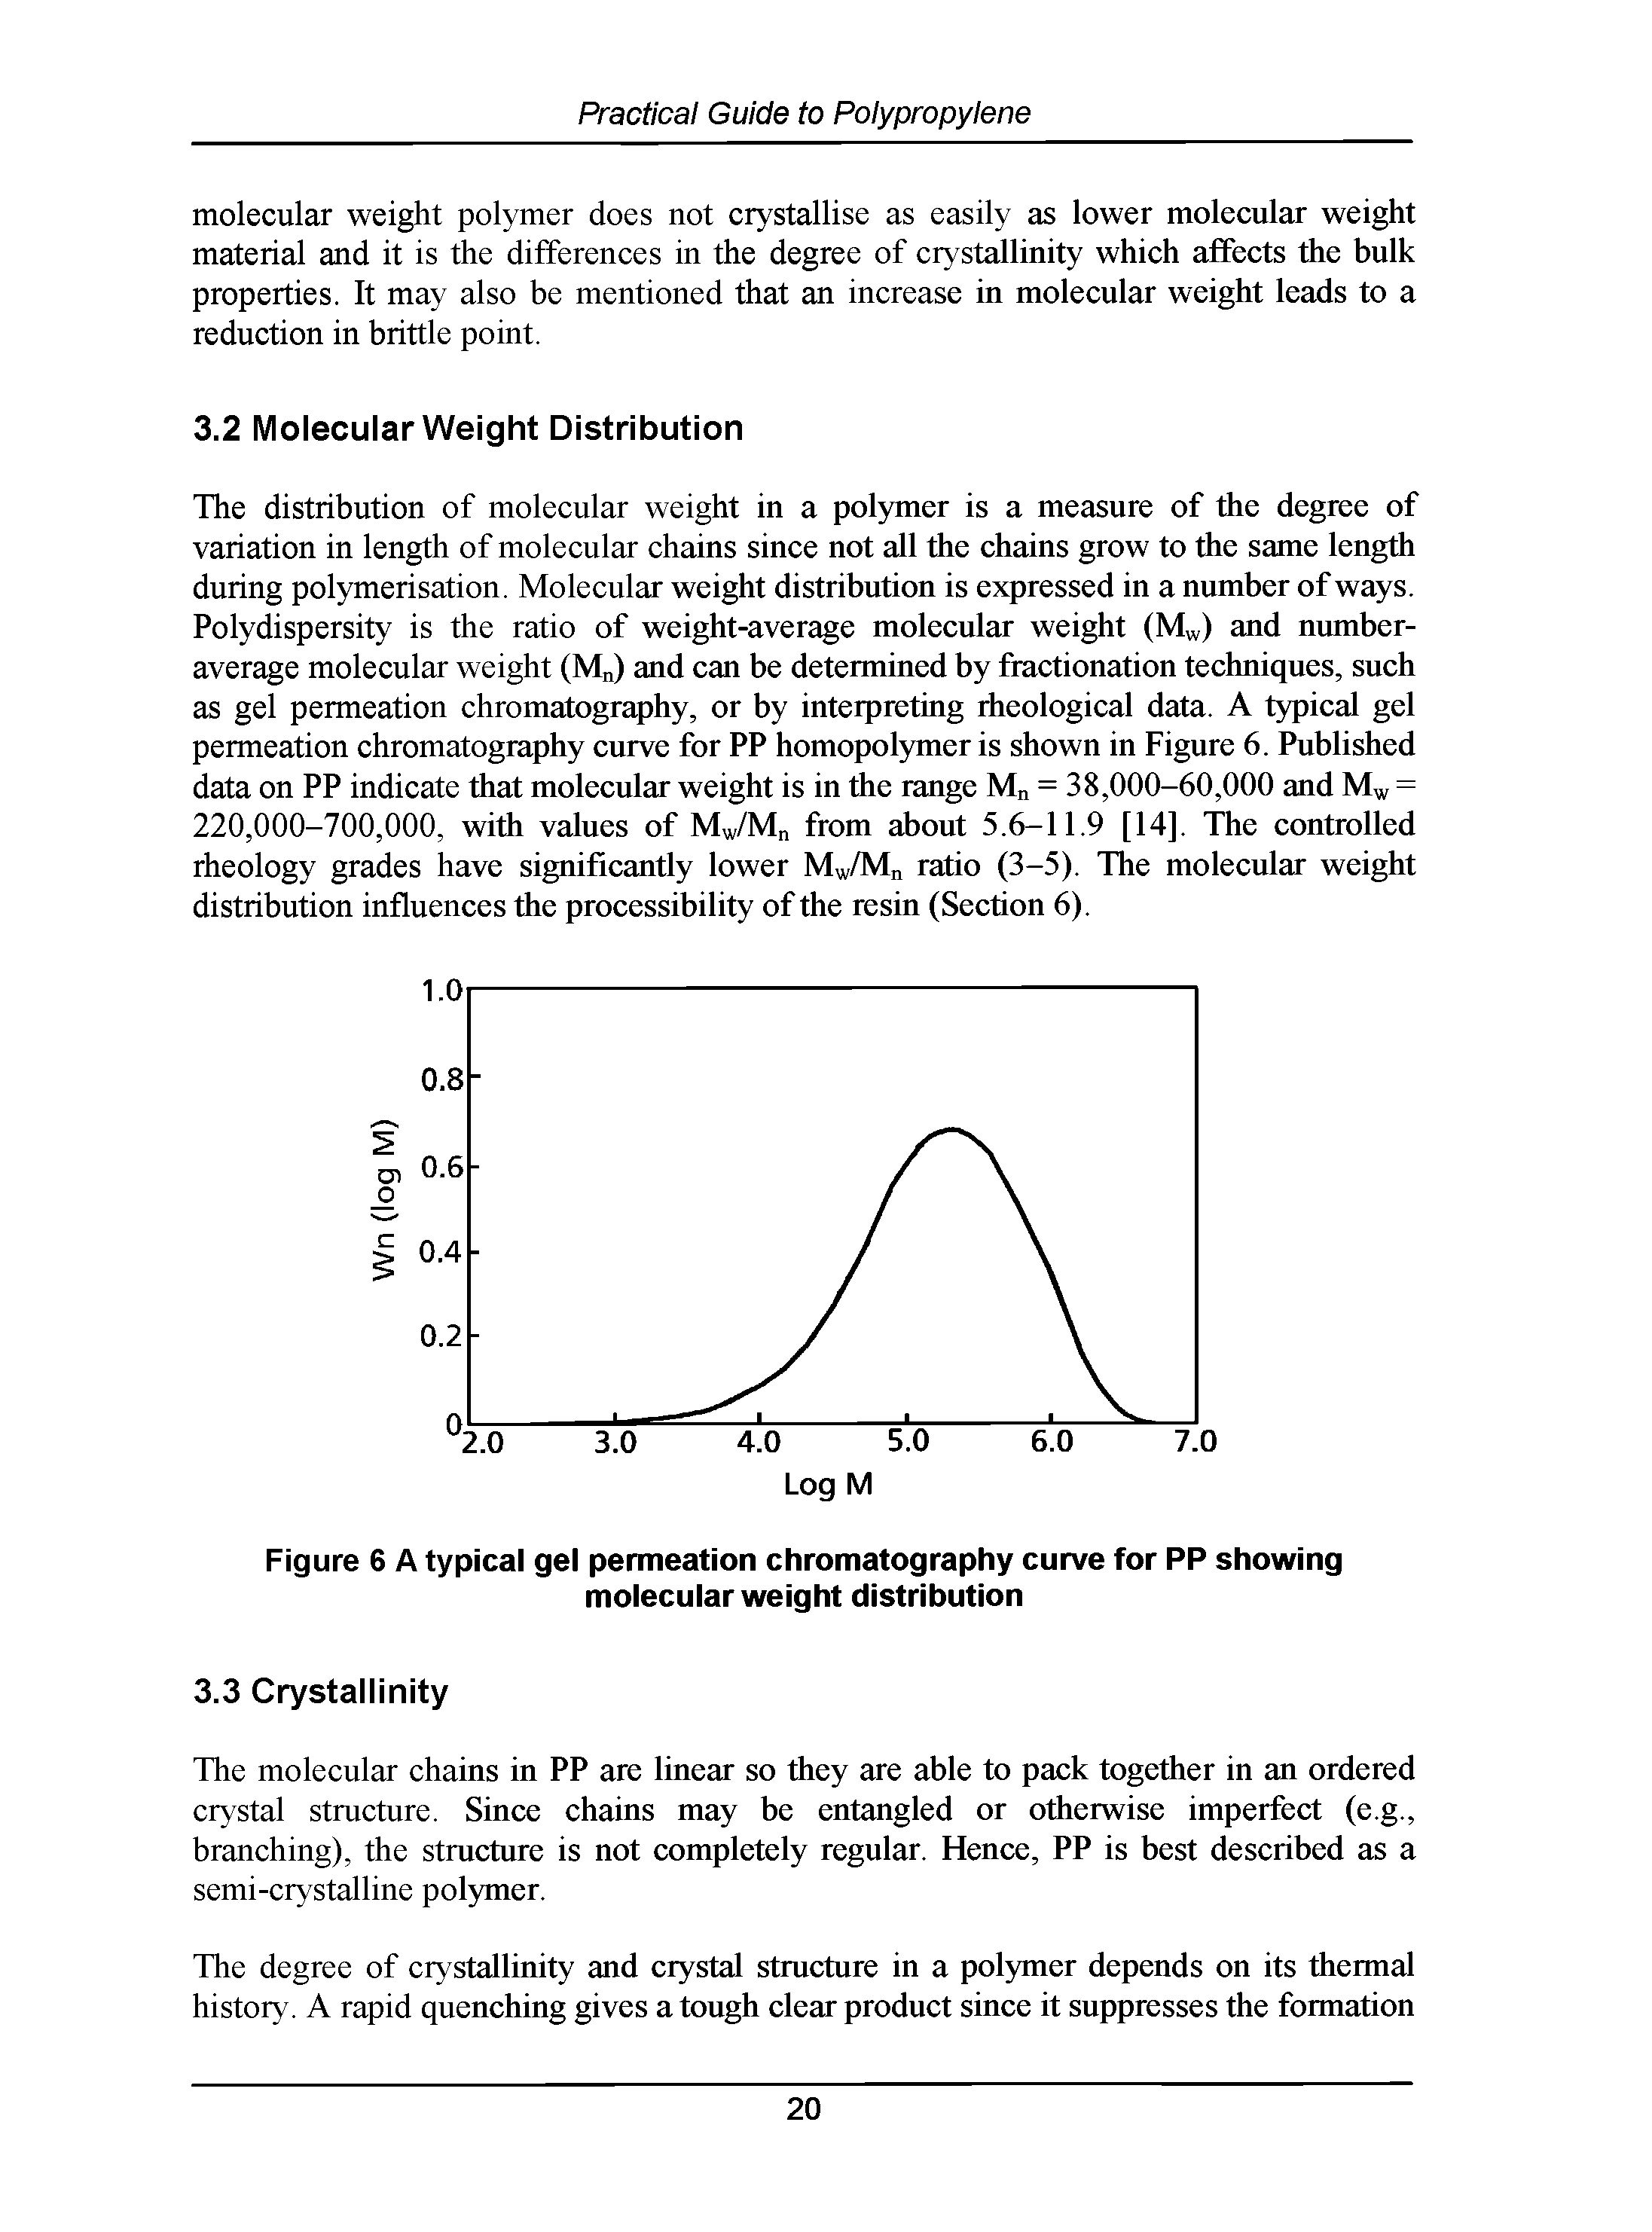 Figure 6 A typical gel permeation chromatography curve for PP showing molecular weight distribution...